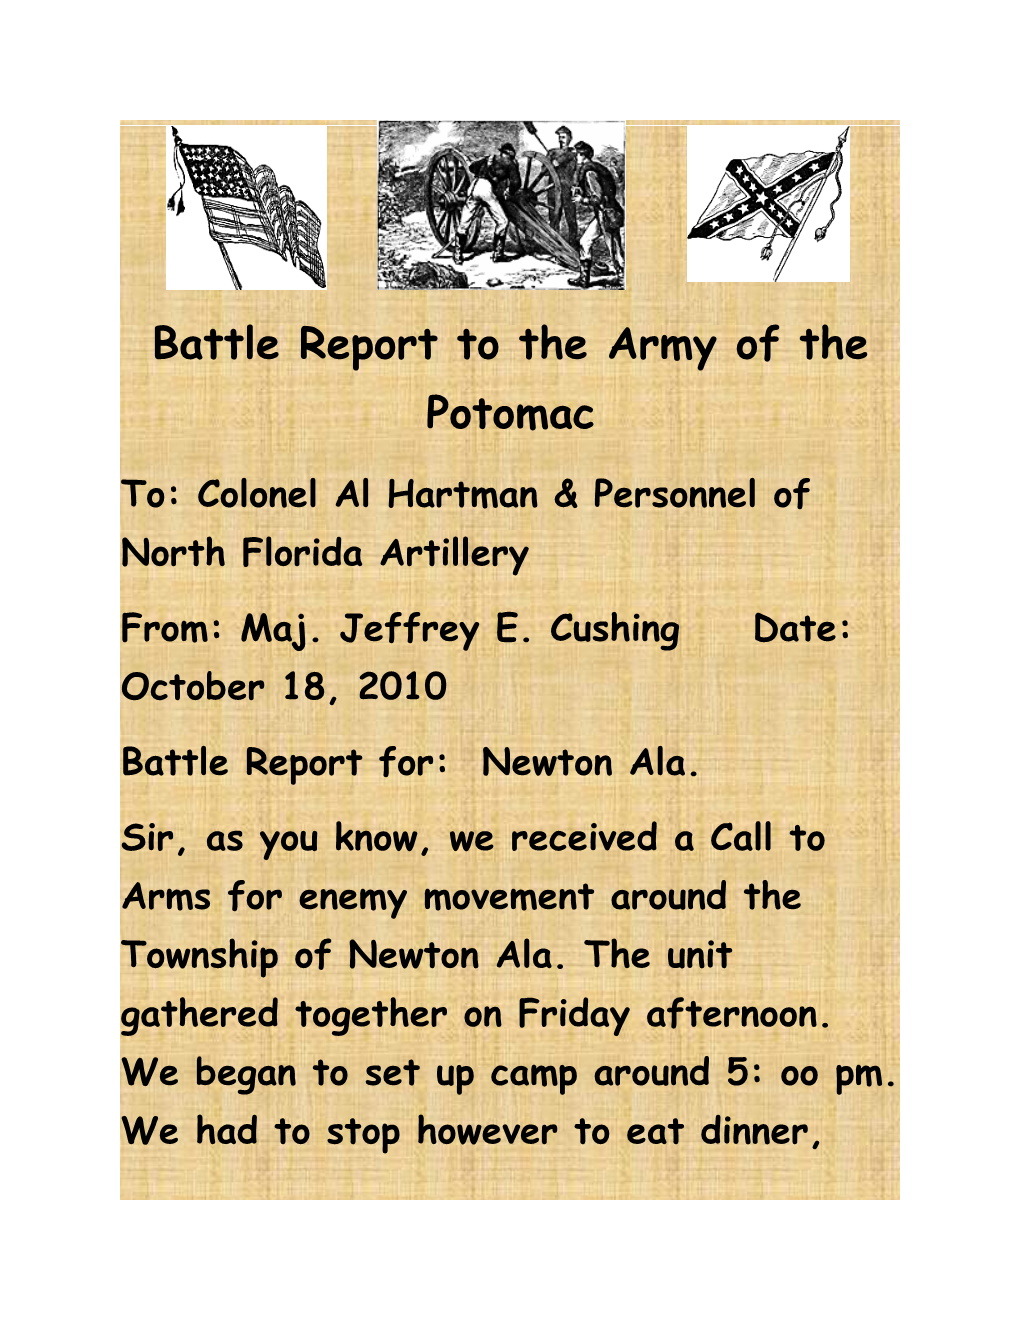 Battle Report to the Army of the Potomac